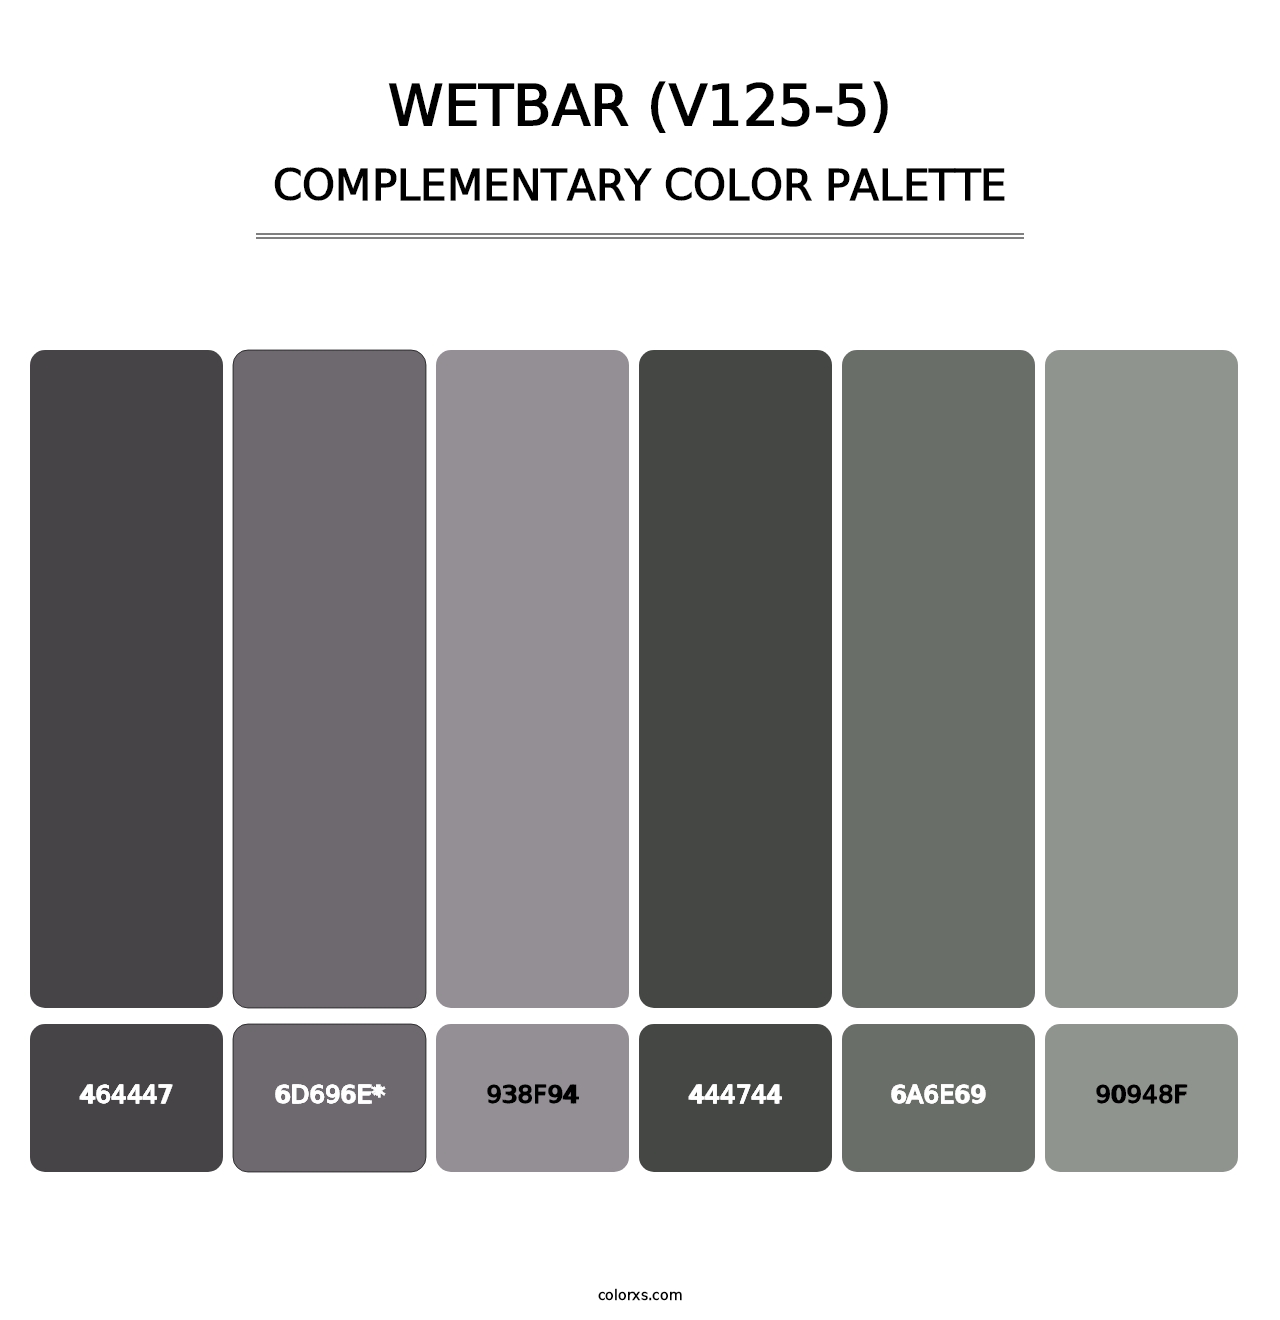 Wetbar (V125-5) - Complementary Color Palette